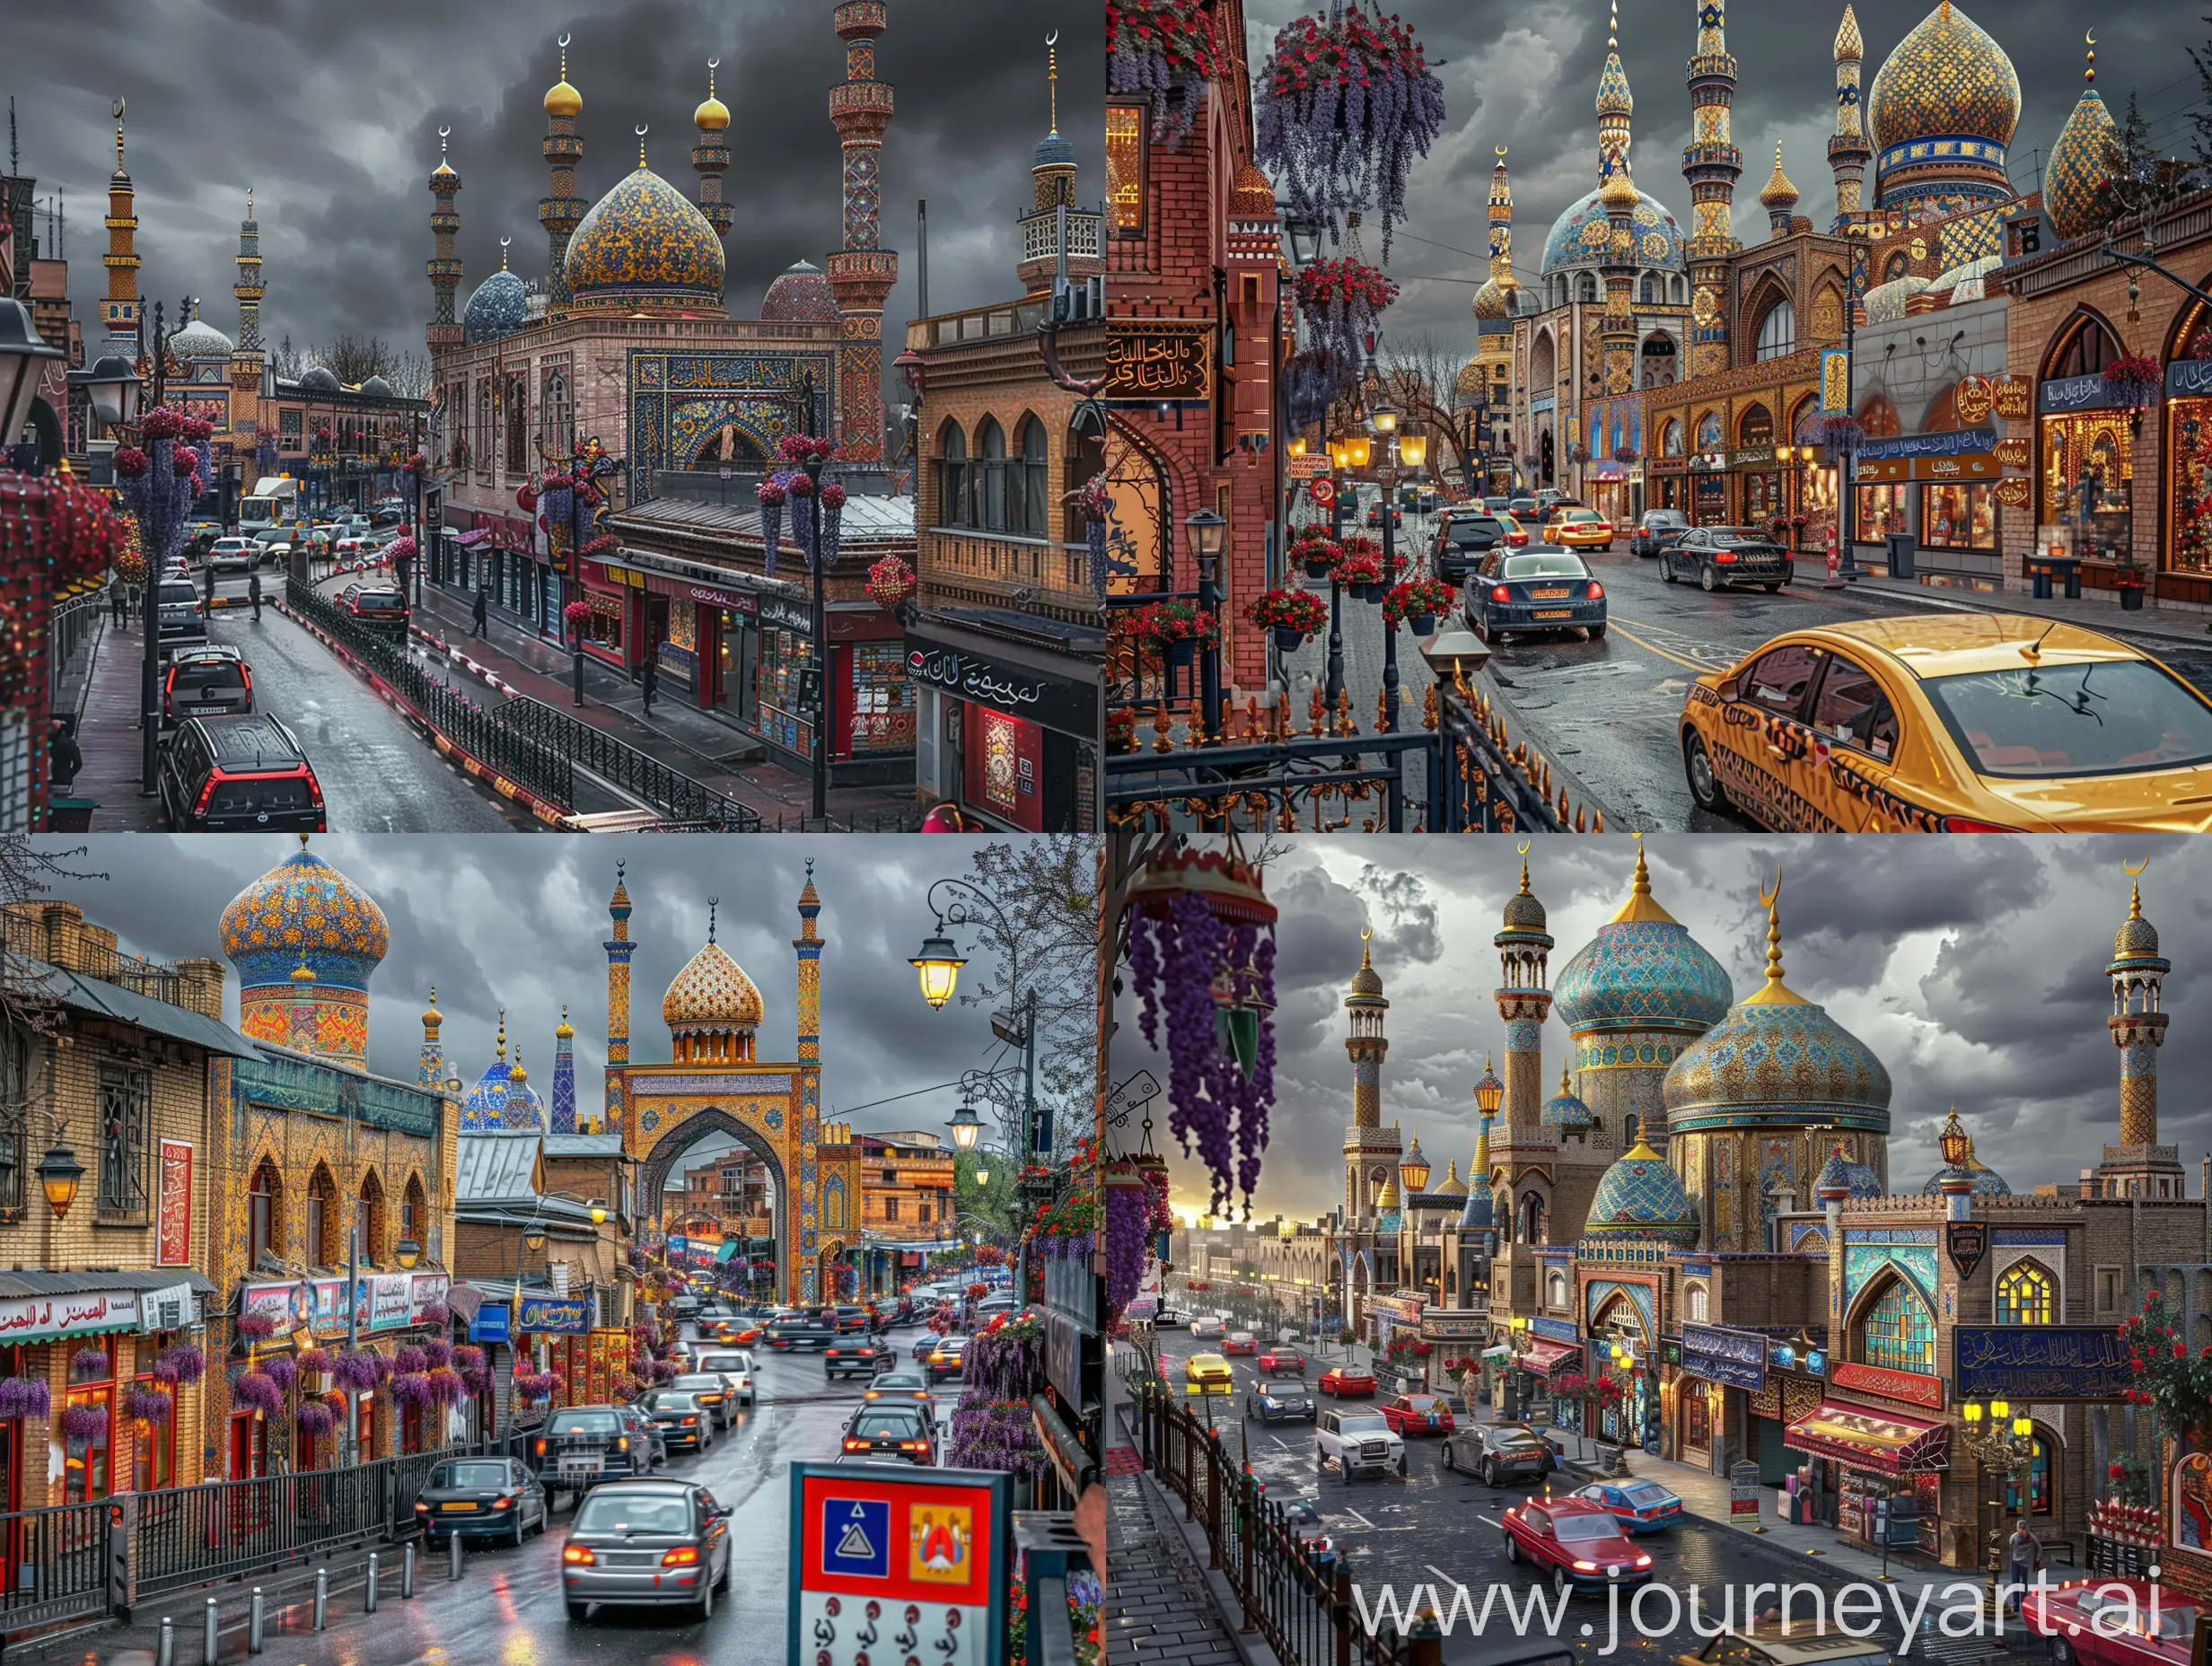 photograph, all buildings and mosques are Timurid marbled brick having golden red blue Persian tilework design, traffic on a France like street having shops and stores at bottom of buildings, islamic style fence on sidewalk, few islamic ornamented lamp lights, direction signboards, lavender red hanging flowers, dark grey sky